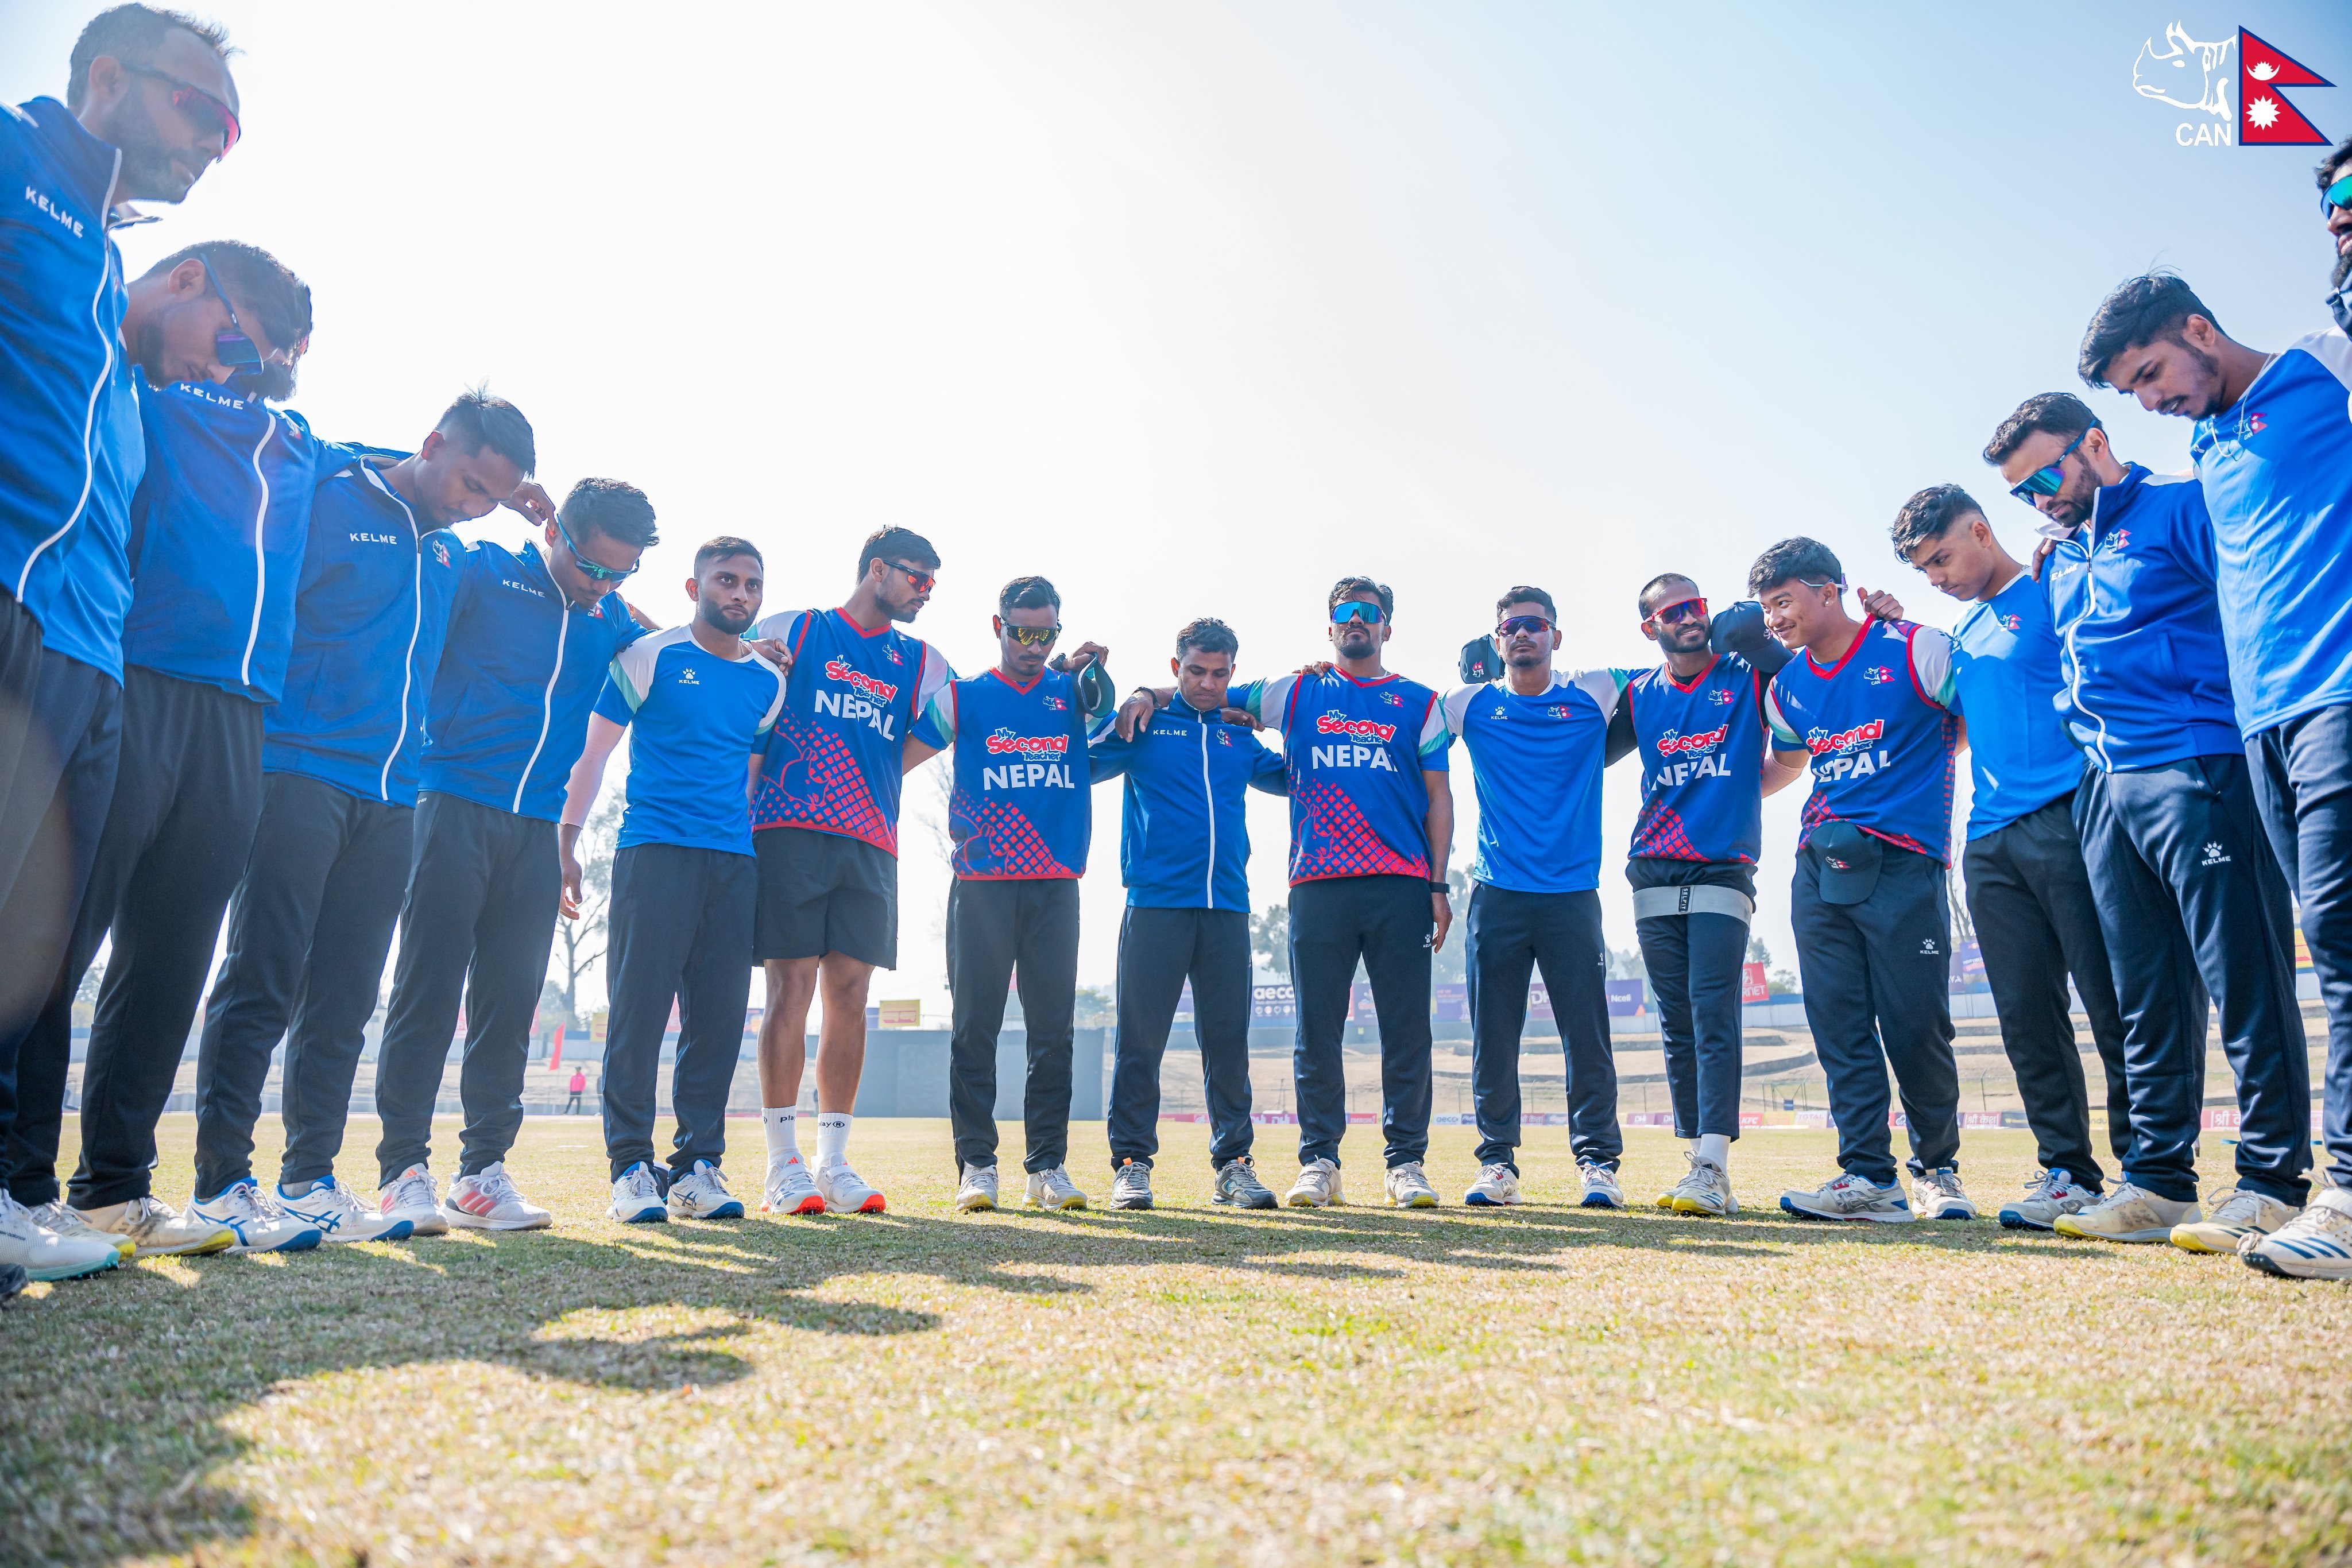 Namibia scores 36 runs for 1 wicket in powerplay against Nepal in Tri-nations T20I opener